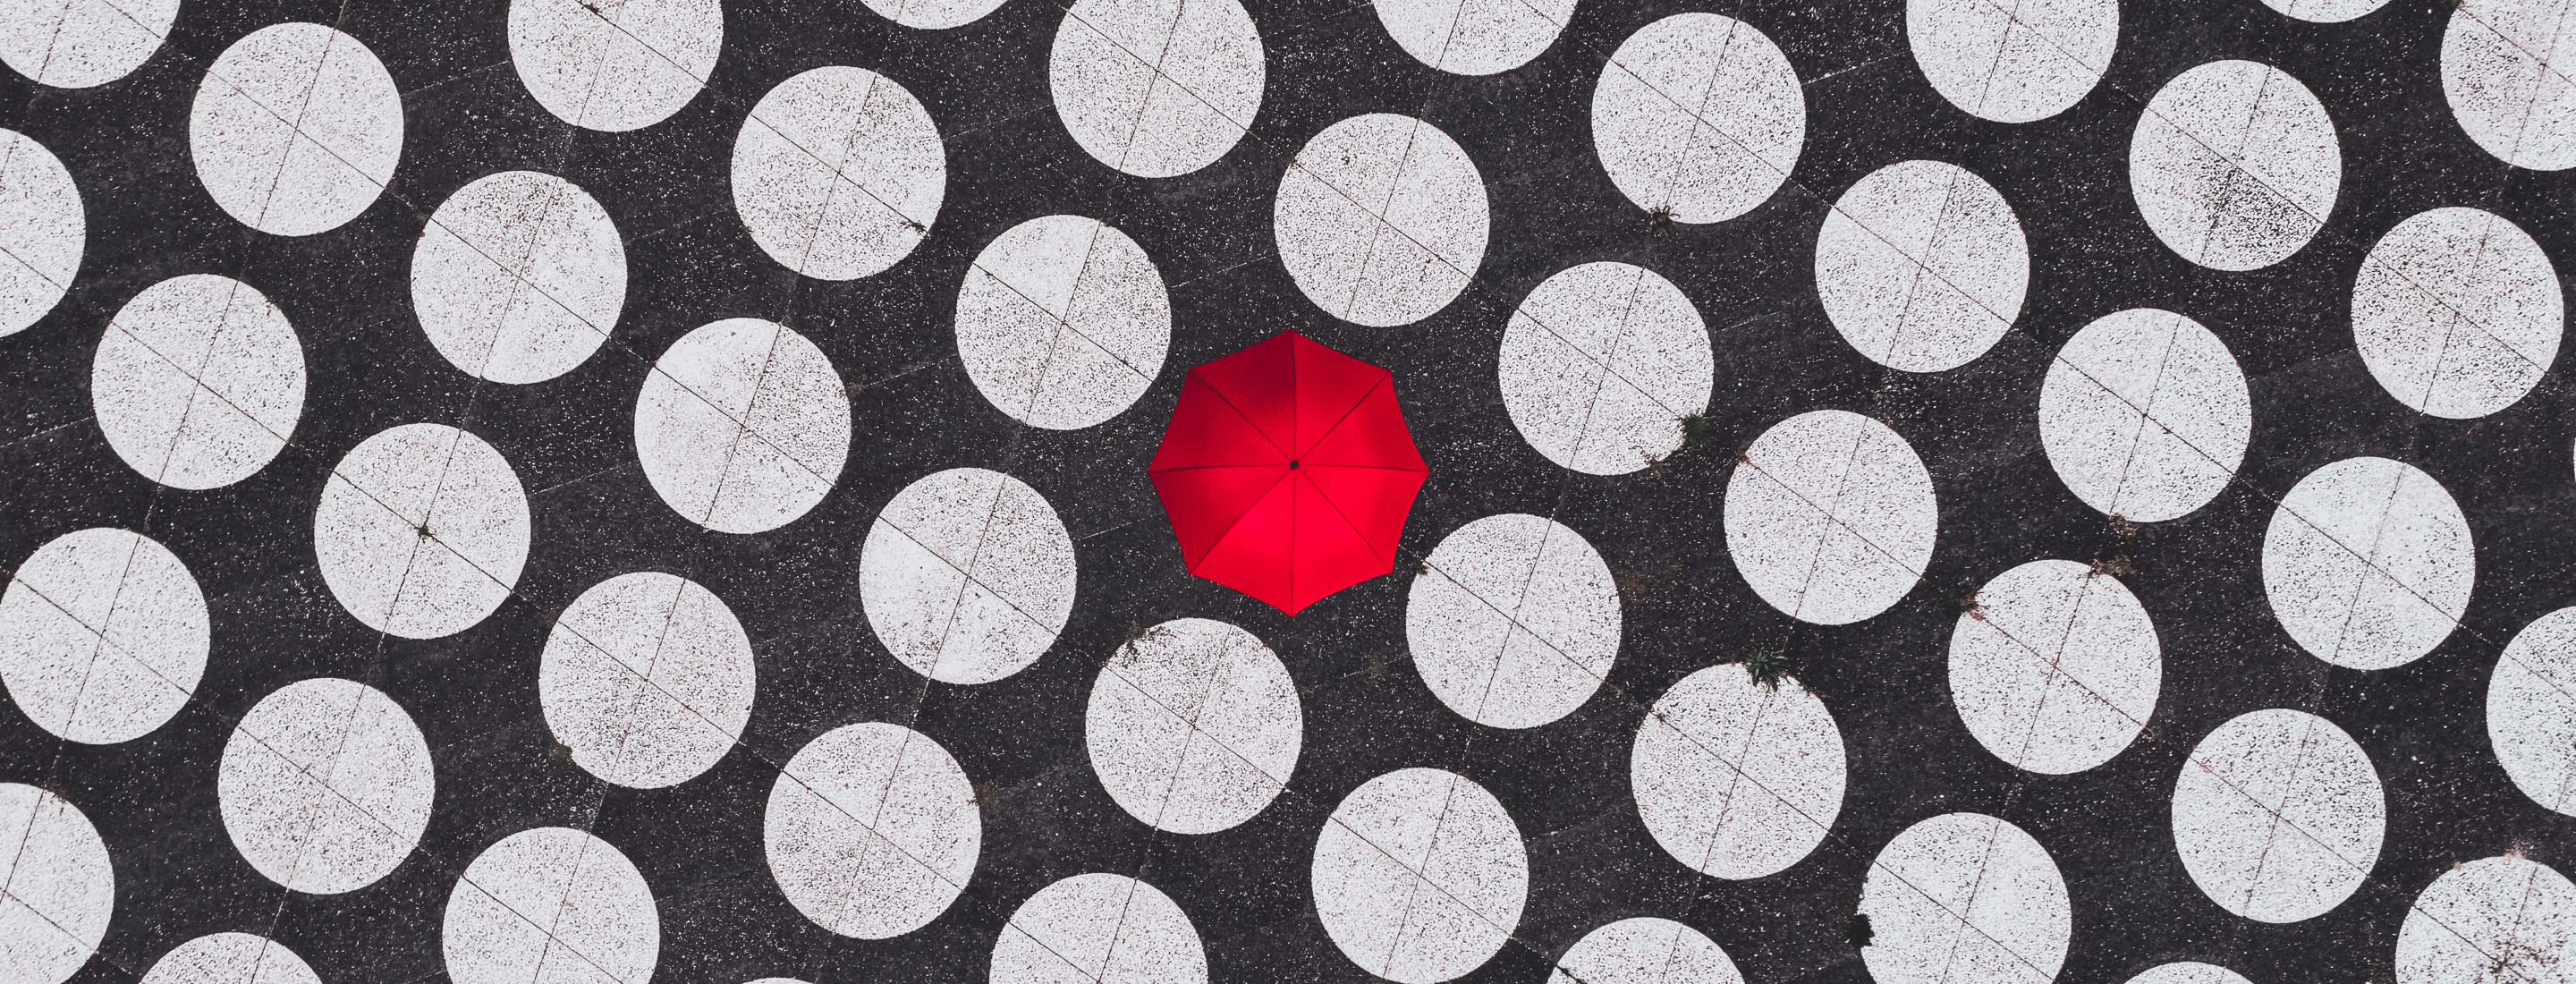 A single, red umbrella stands out from many empty, plain white tables